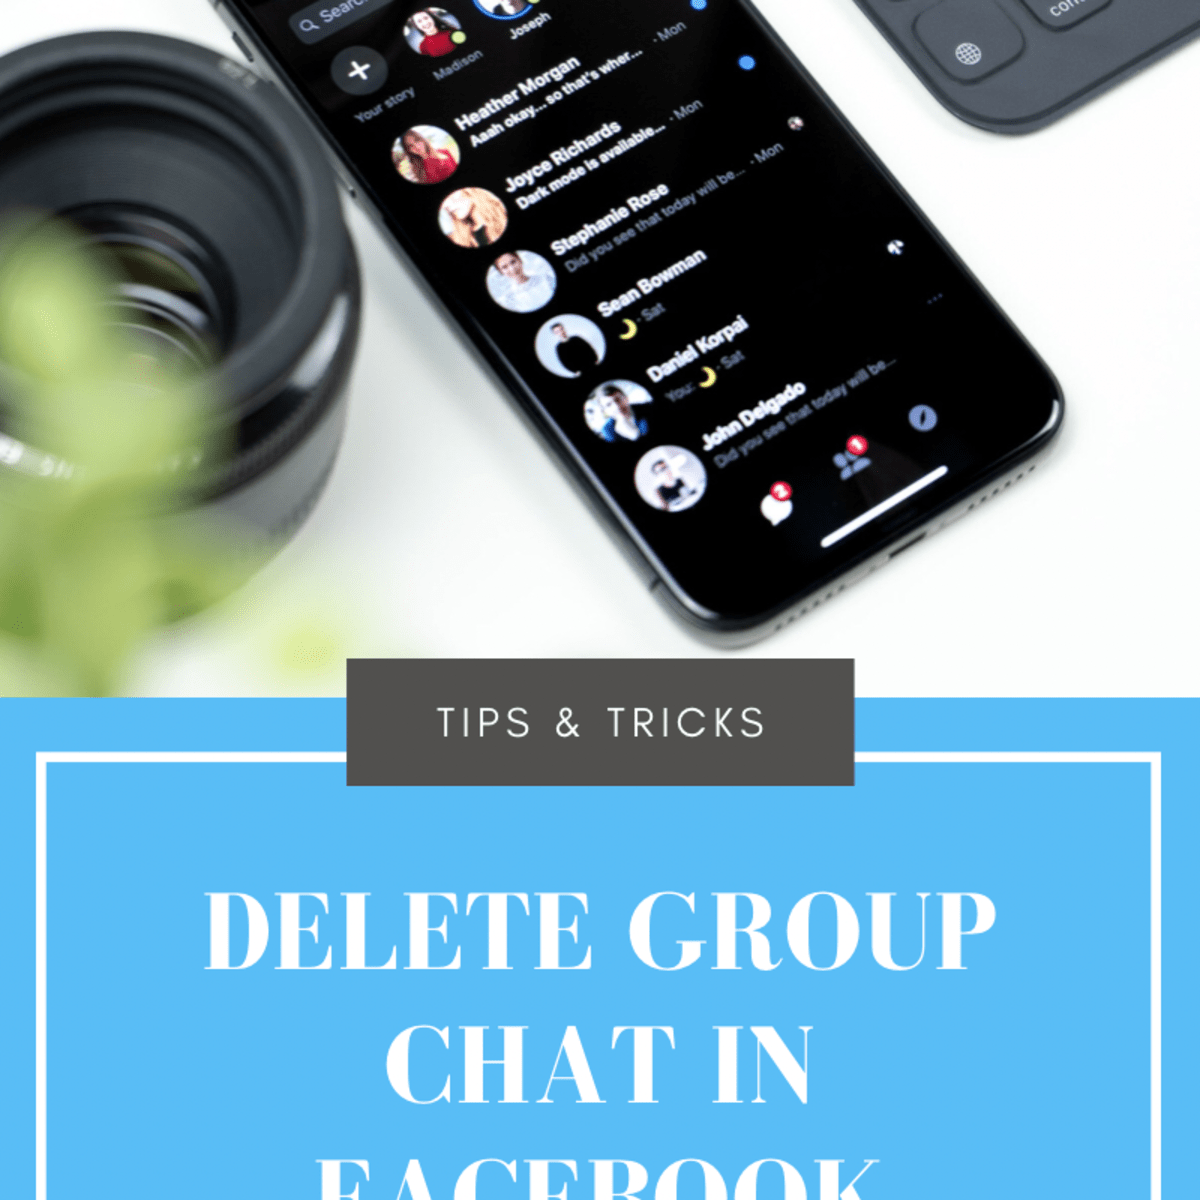 How To Delete A Group Chat In Facebook Messenger Turbofuture